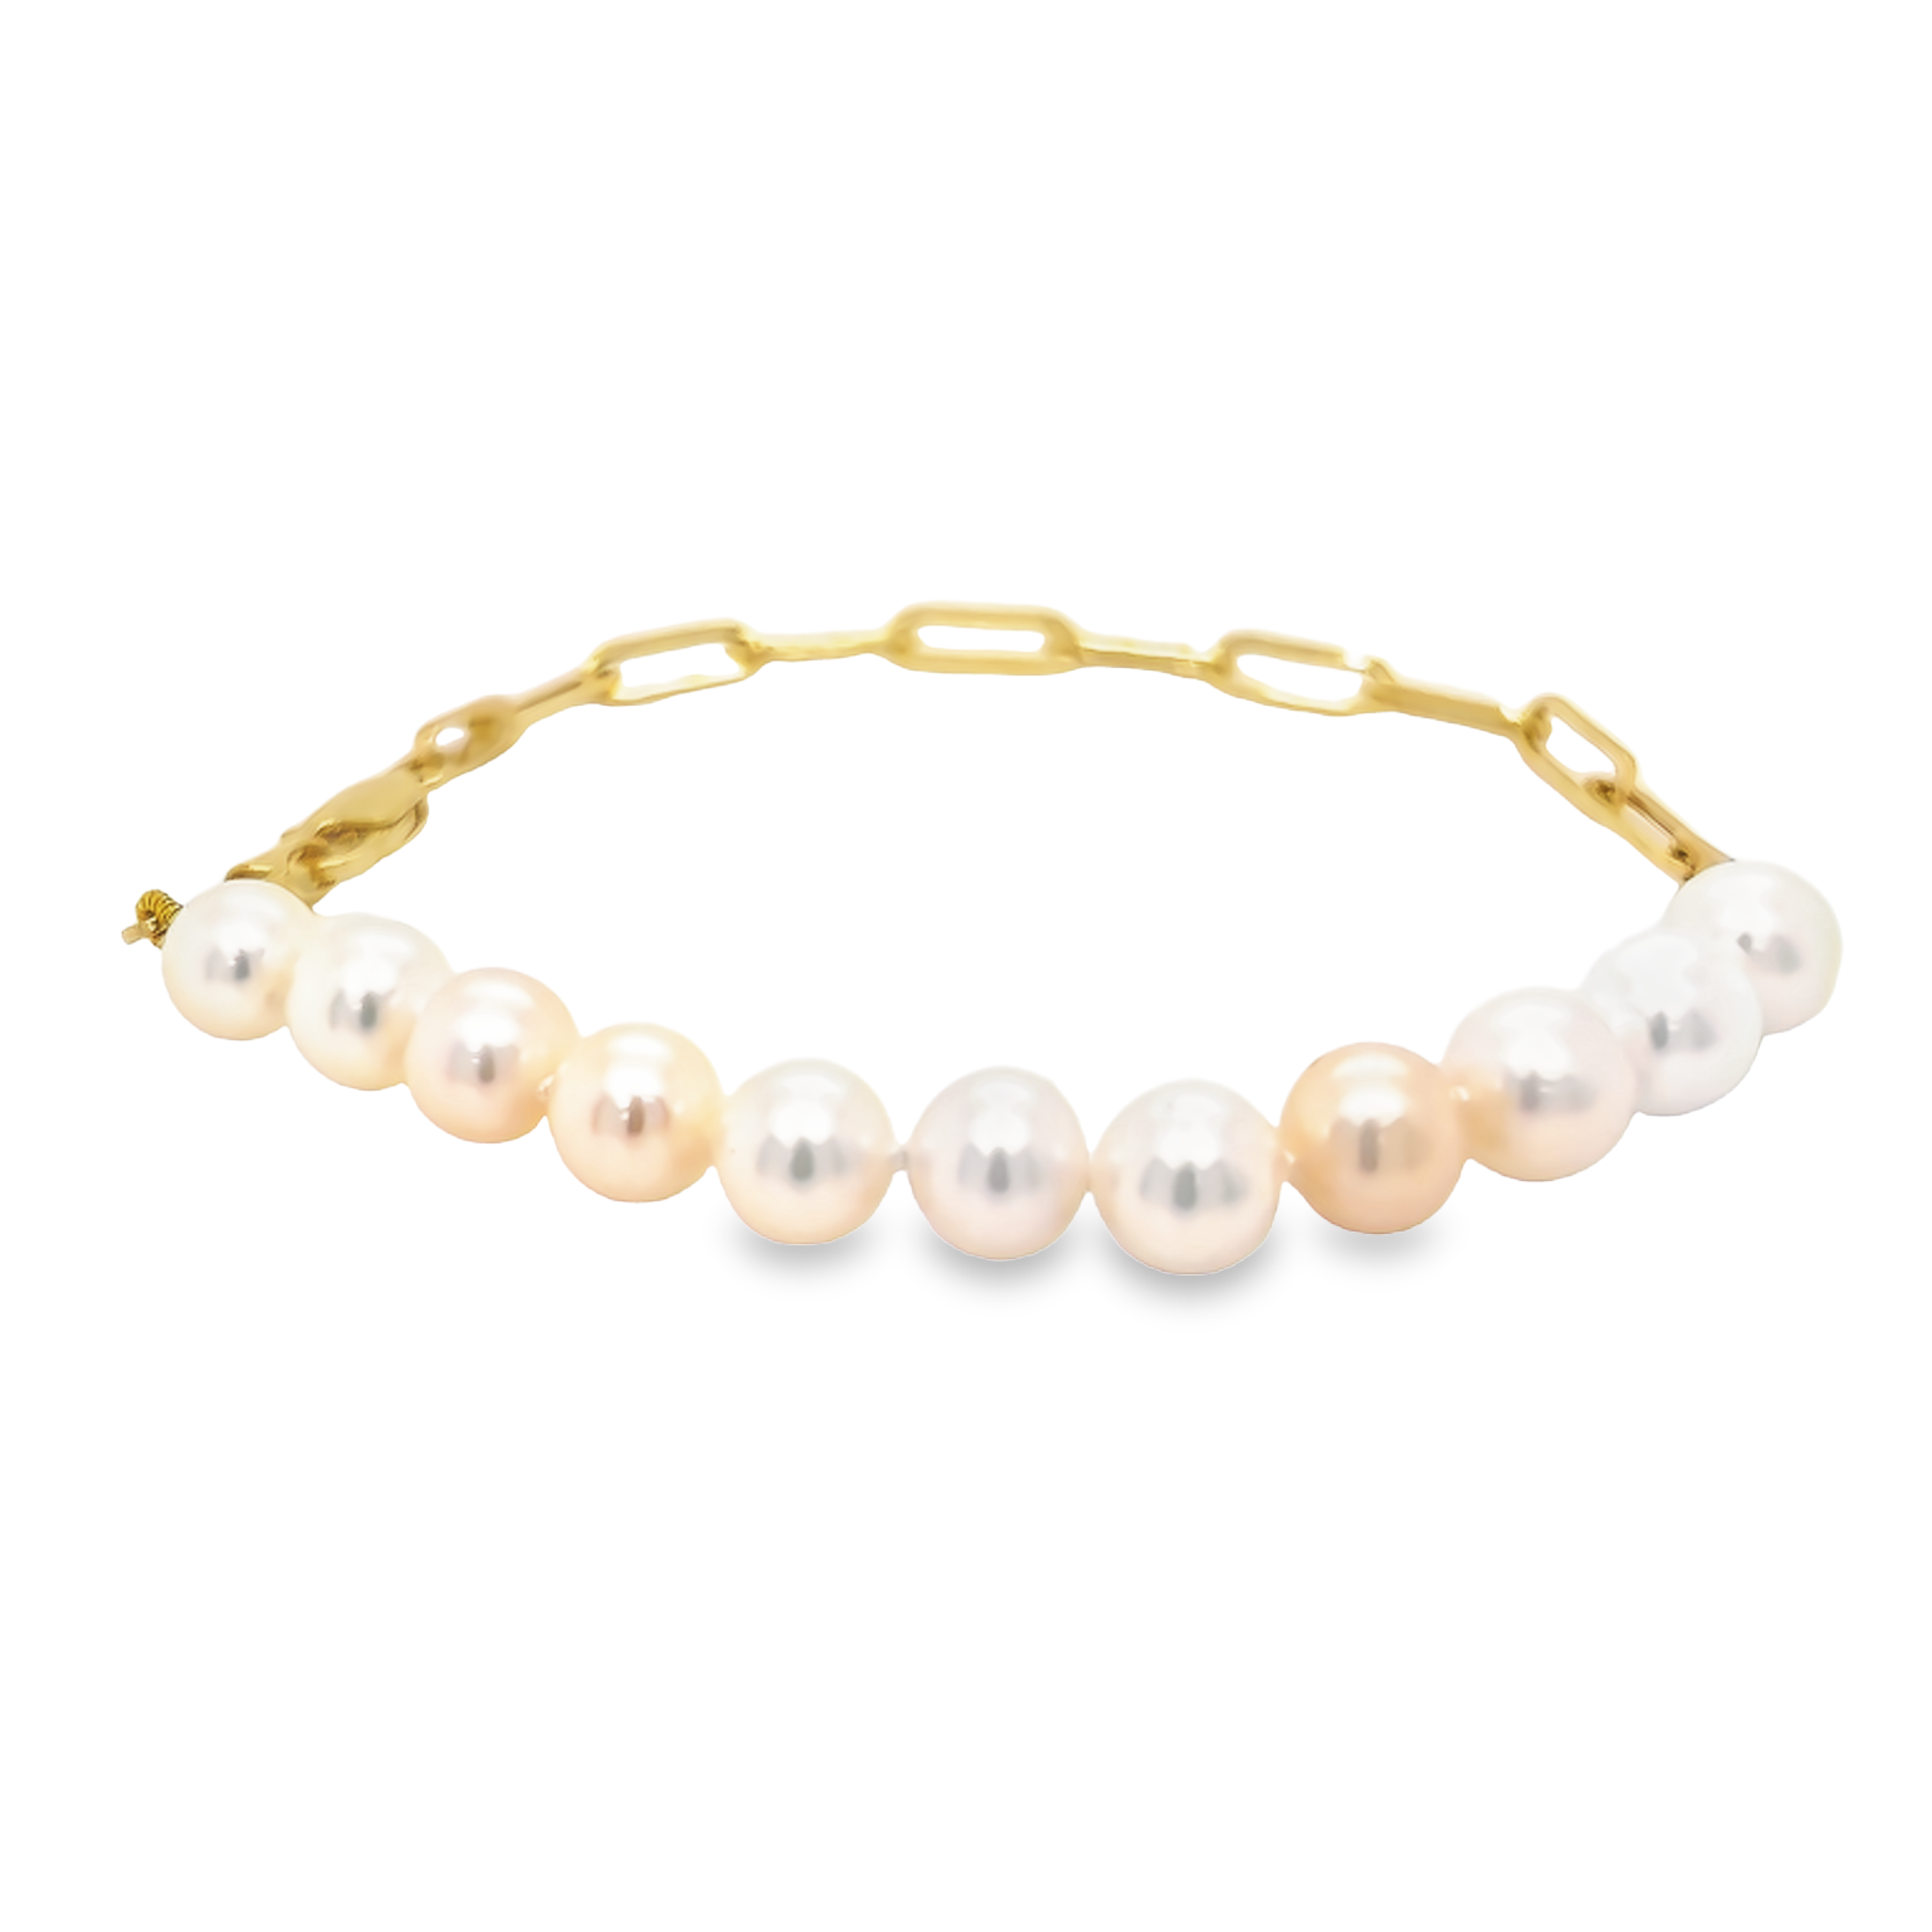 14 karat gold paper clip and pearl bracelet. 11 freshwater pearls that measure 6-7mm each.